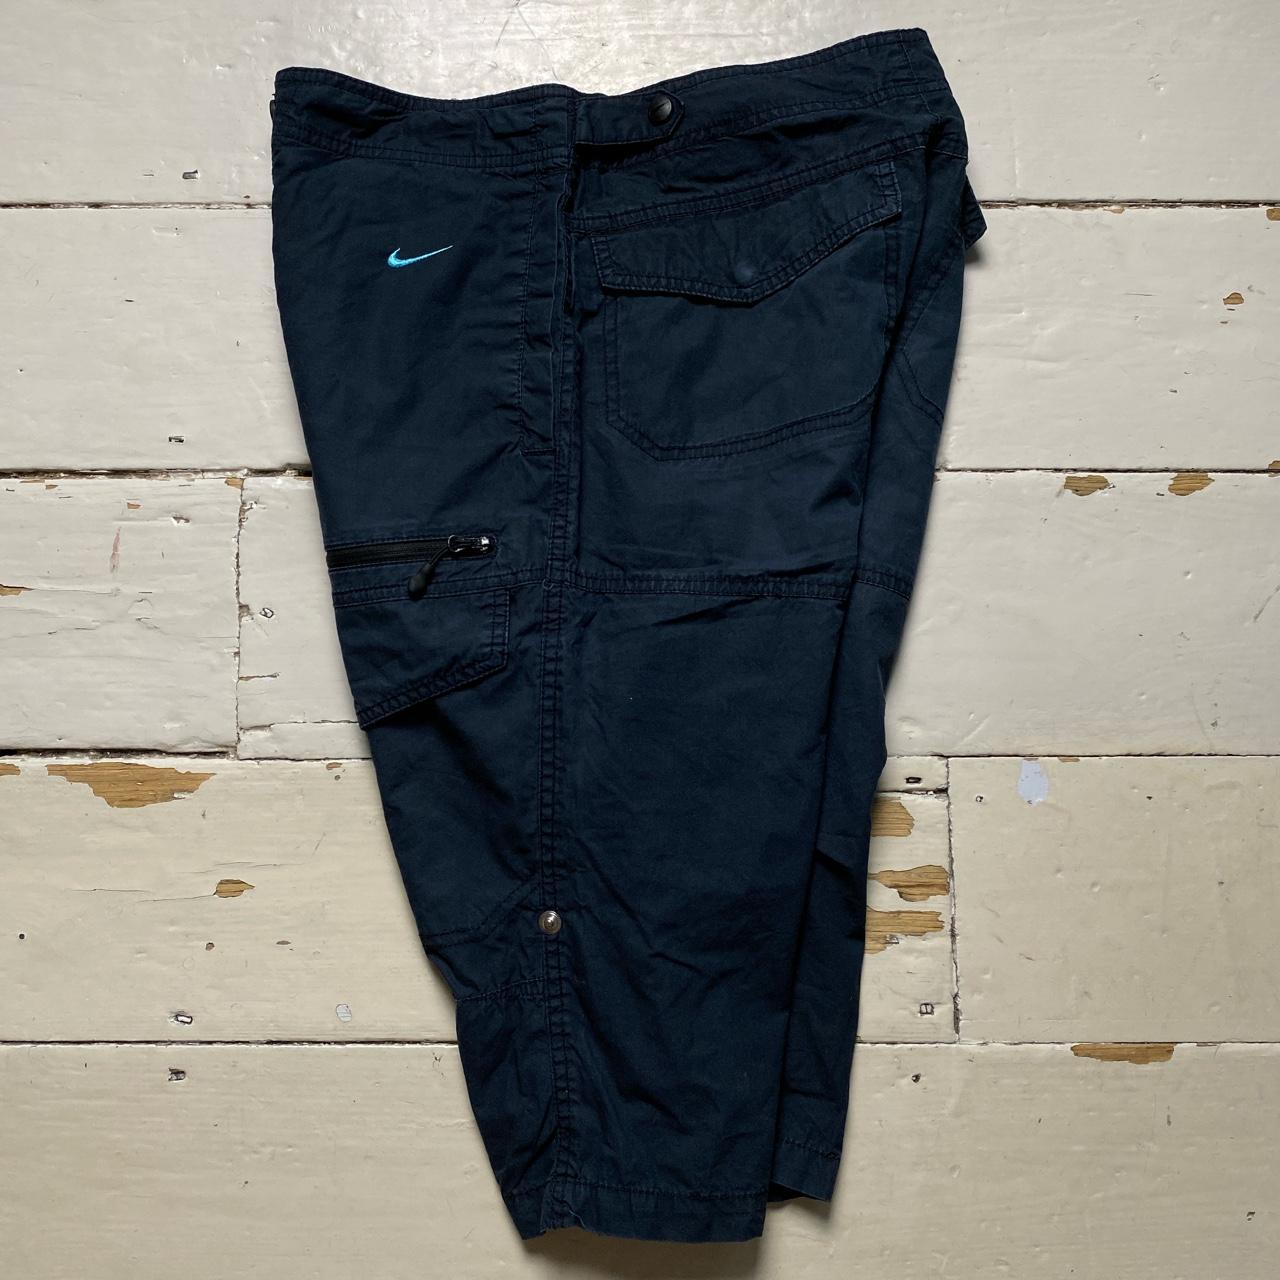 Nike Athletic Department Looolp Swoosh Baby Blue and Navy Cargo Combat Shorts